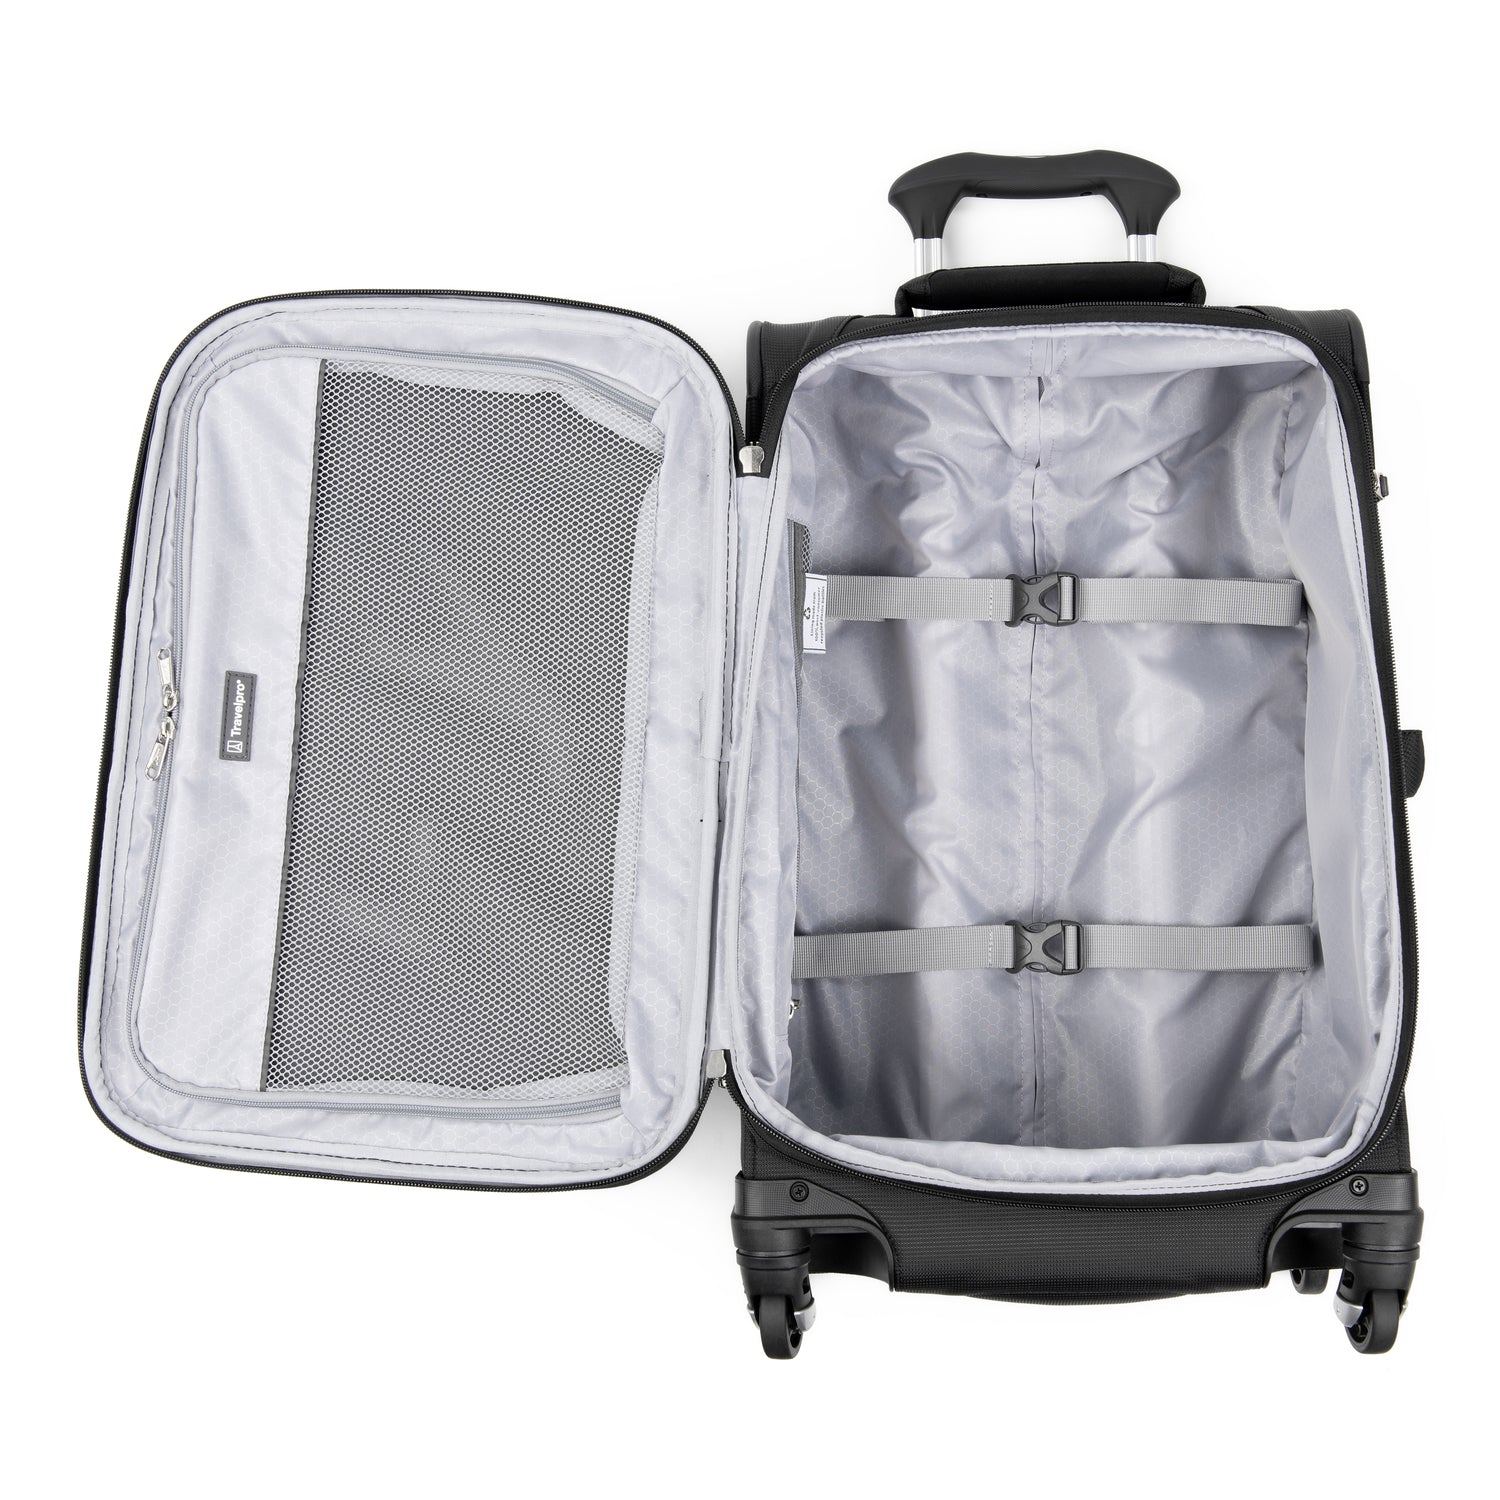 Travelpro Maxlite 5 22 Expandable Carry on Rollaboard - Black